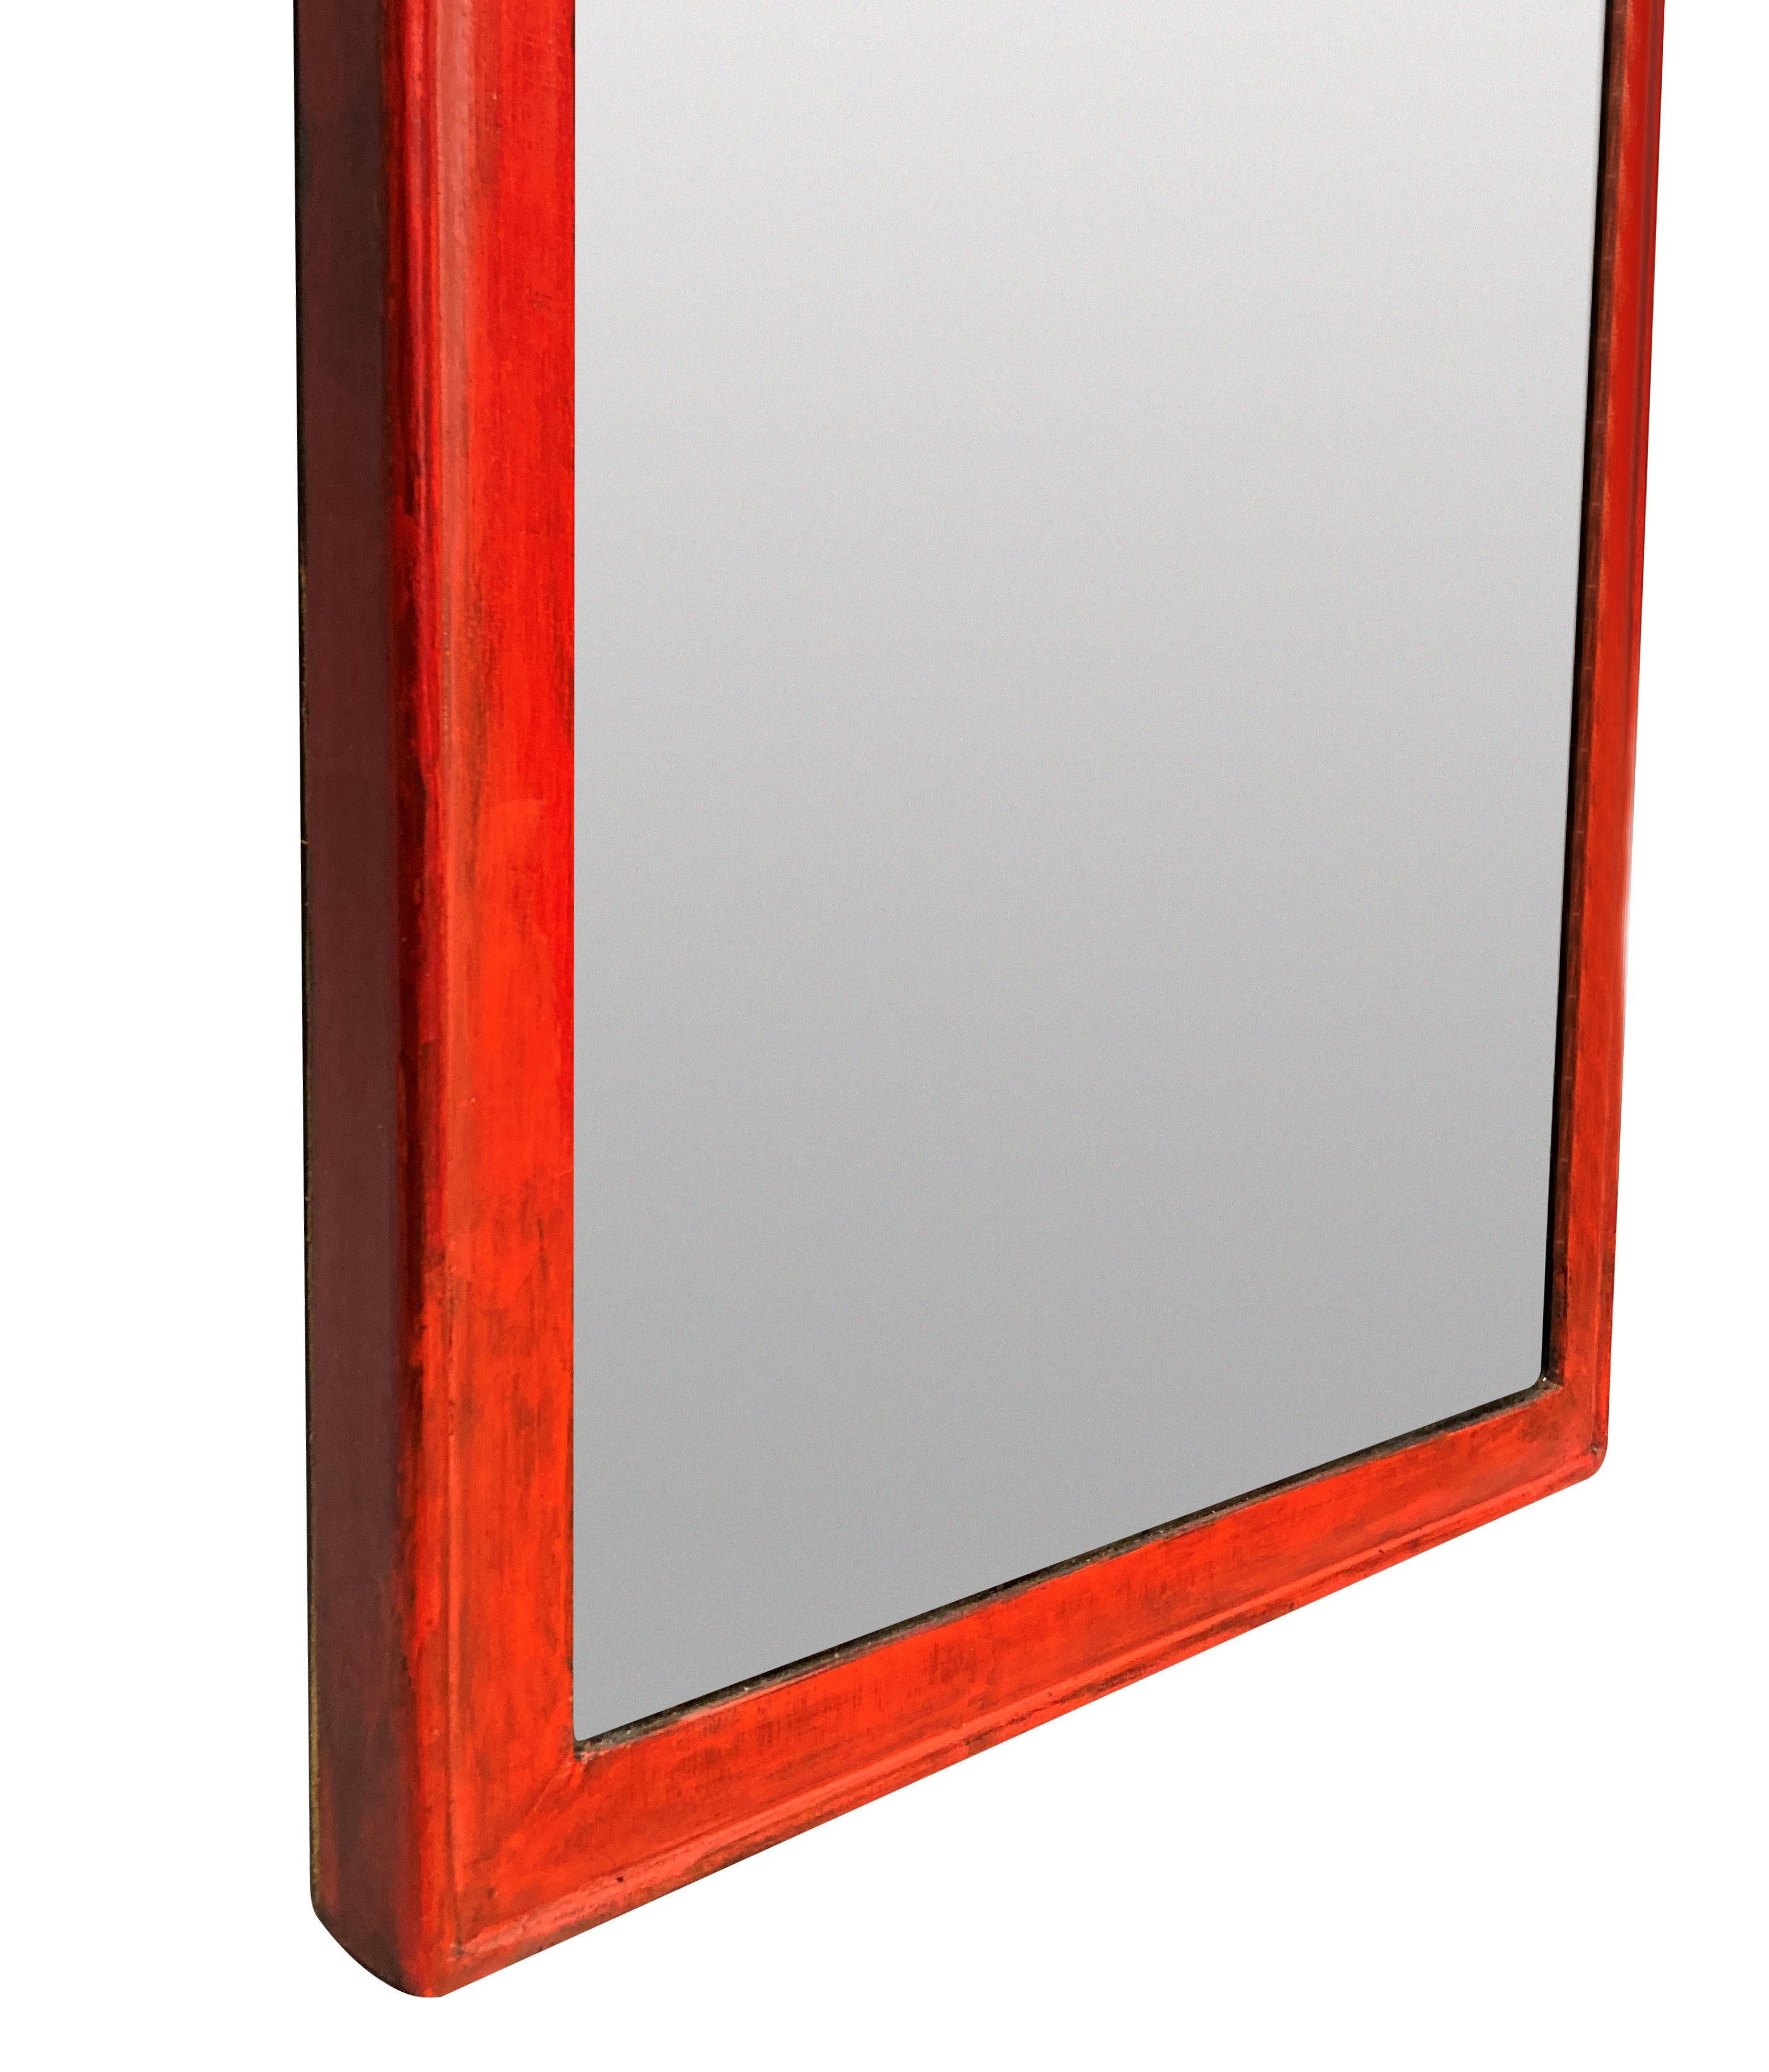 English Red Lacquered Queen Anne Style Mirror For Sale